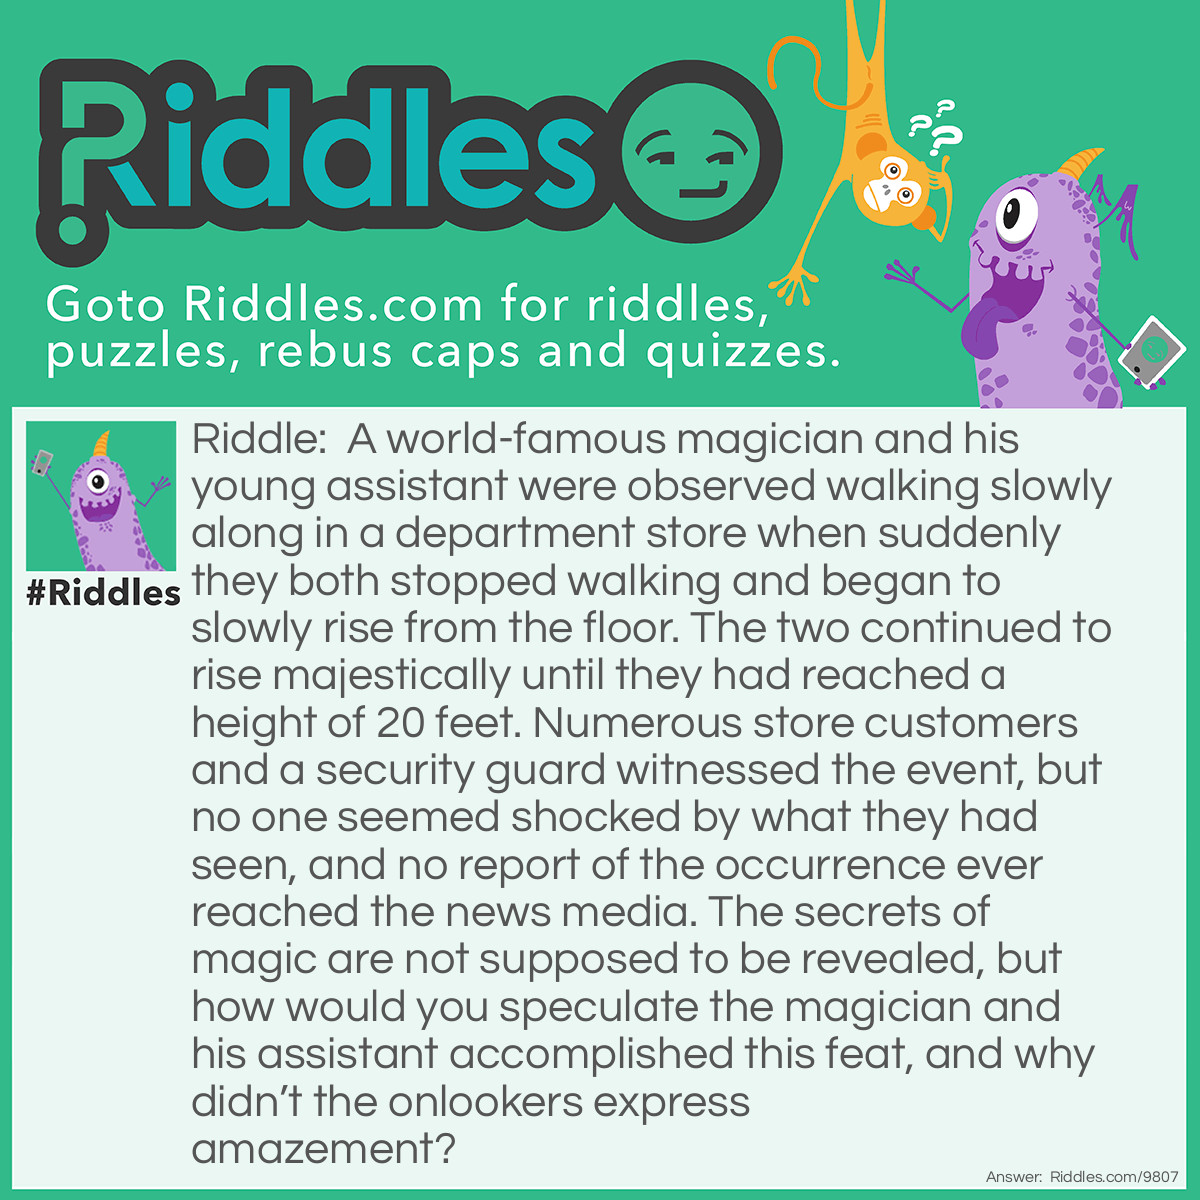 Riddle: A world-famous magician and his young assistant were observed walking slowly along in a department store when suddenly they both stopped walking and began to slowly rise from the floor. The two continued to rise majestically until they had reached a height of 20 feet. Numerous store customers and a security guard witnessed the event, but no one seemed shocked by what they had seen, and no report of the occurrence ever reached the news media. The secrets of magic are not supposed to be revealed, but how would you speculate the magician and his assistant accomplished this feat, and why didn't the onlookers express amazement? Answer: The magician and his assistant were simply using an escalator to go up to the next floor in the department store.